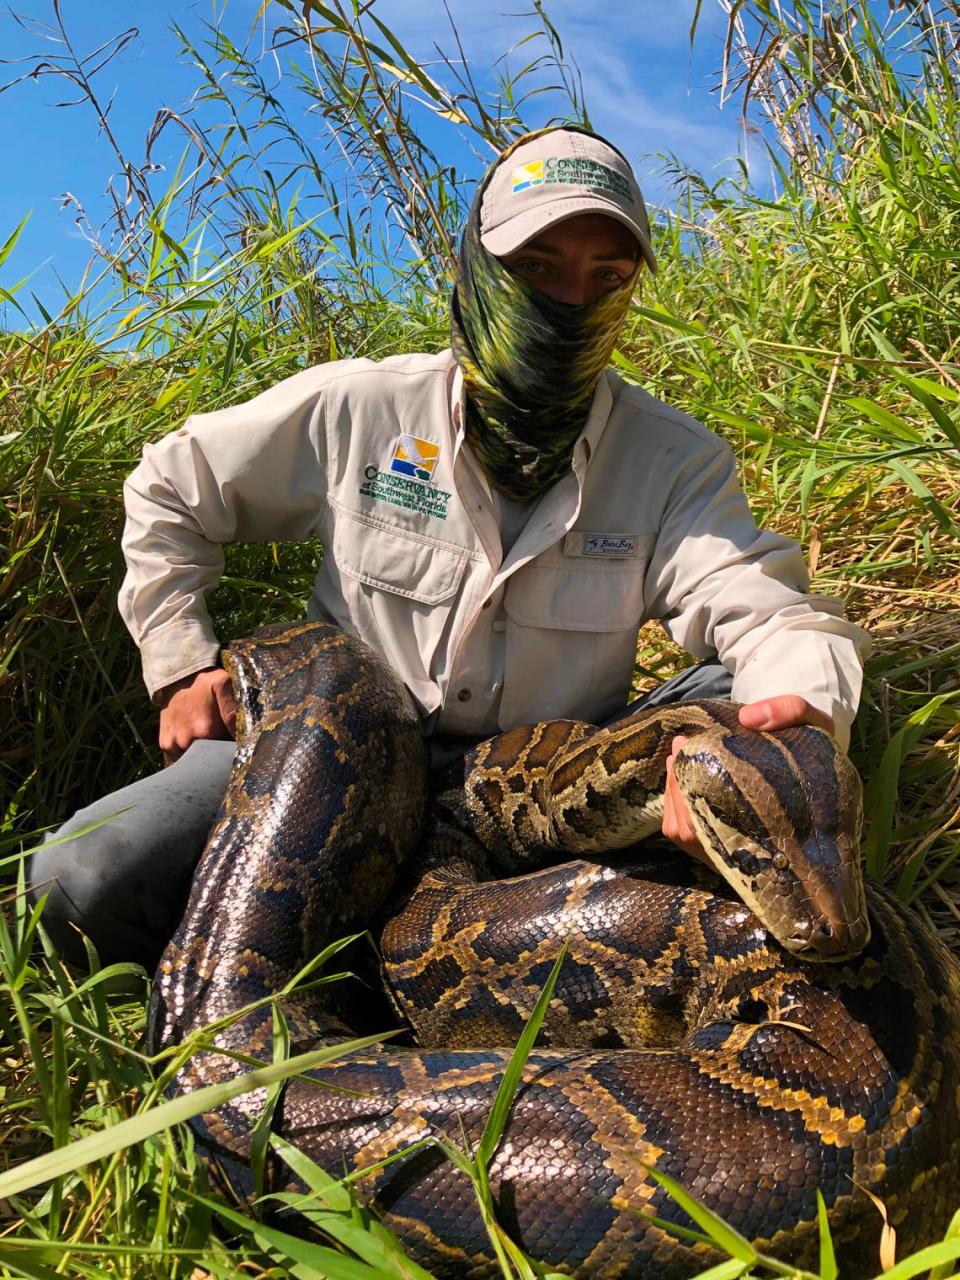 Like iguanas, Burmese pythons also need to sun themselves to warm up when temperatures drop below the 50s, making them easier to spot by hunters.